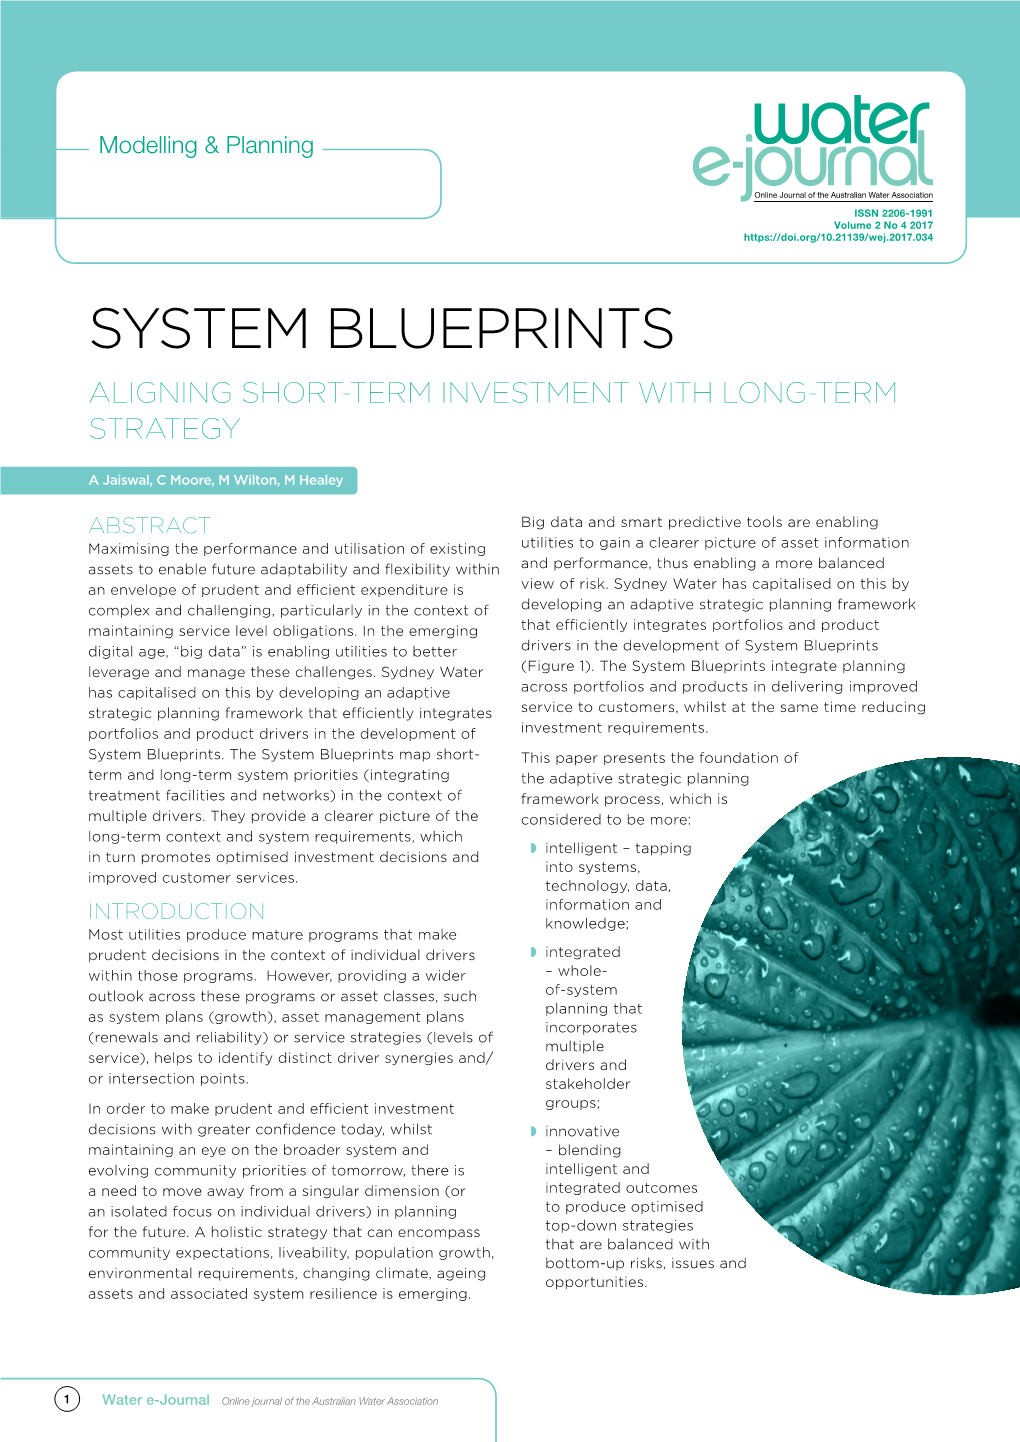 System Blueprints Aligning Short-Term Investment with Long-Term Strategy